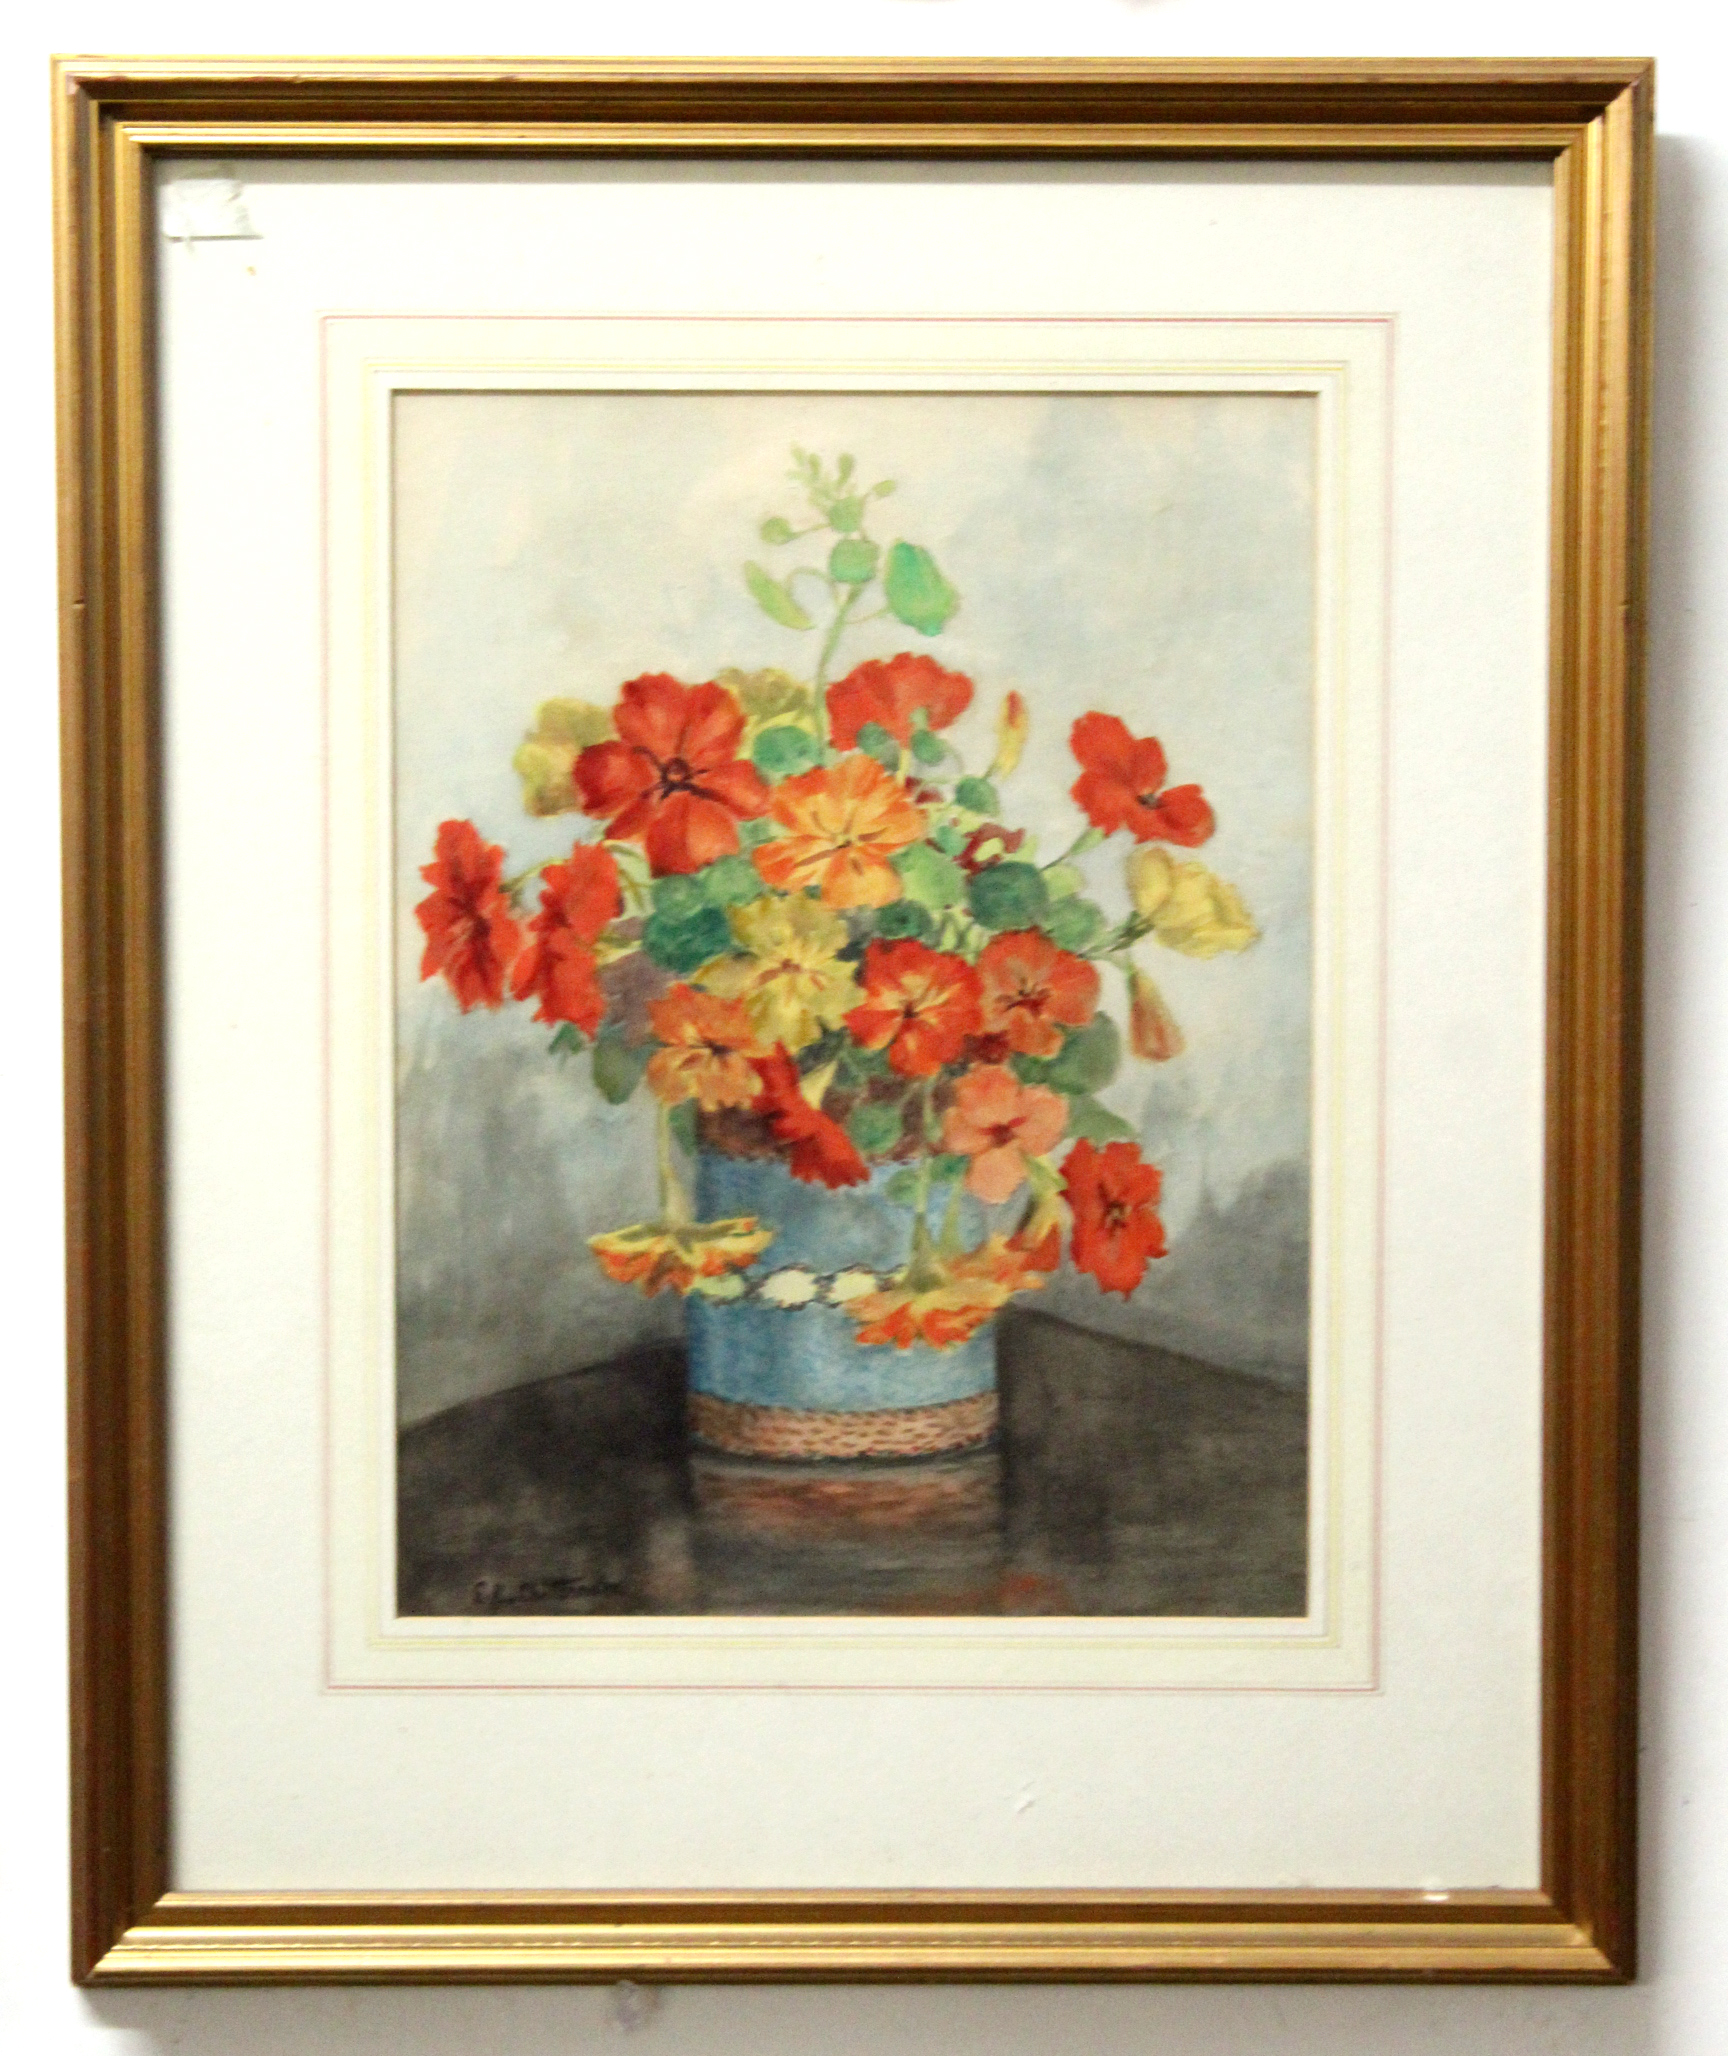 Helen Fletcher, signed two watercolours, "Pansies" and "Anemones", together with a further